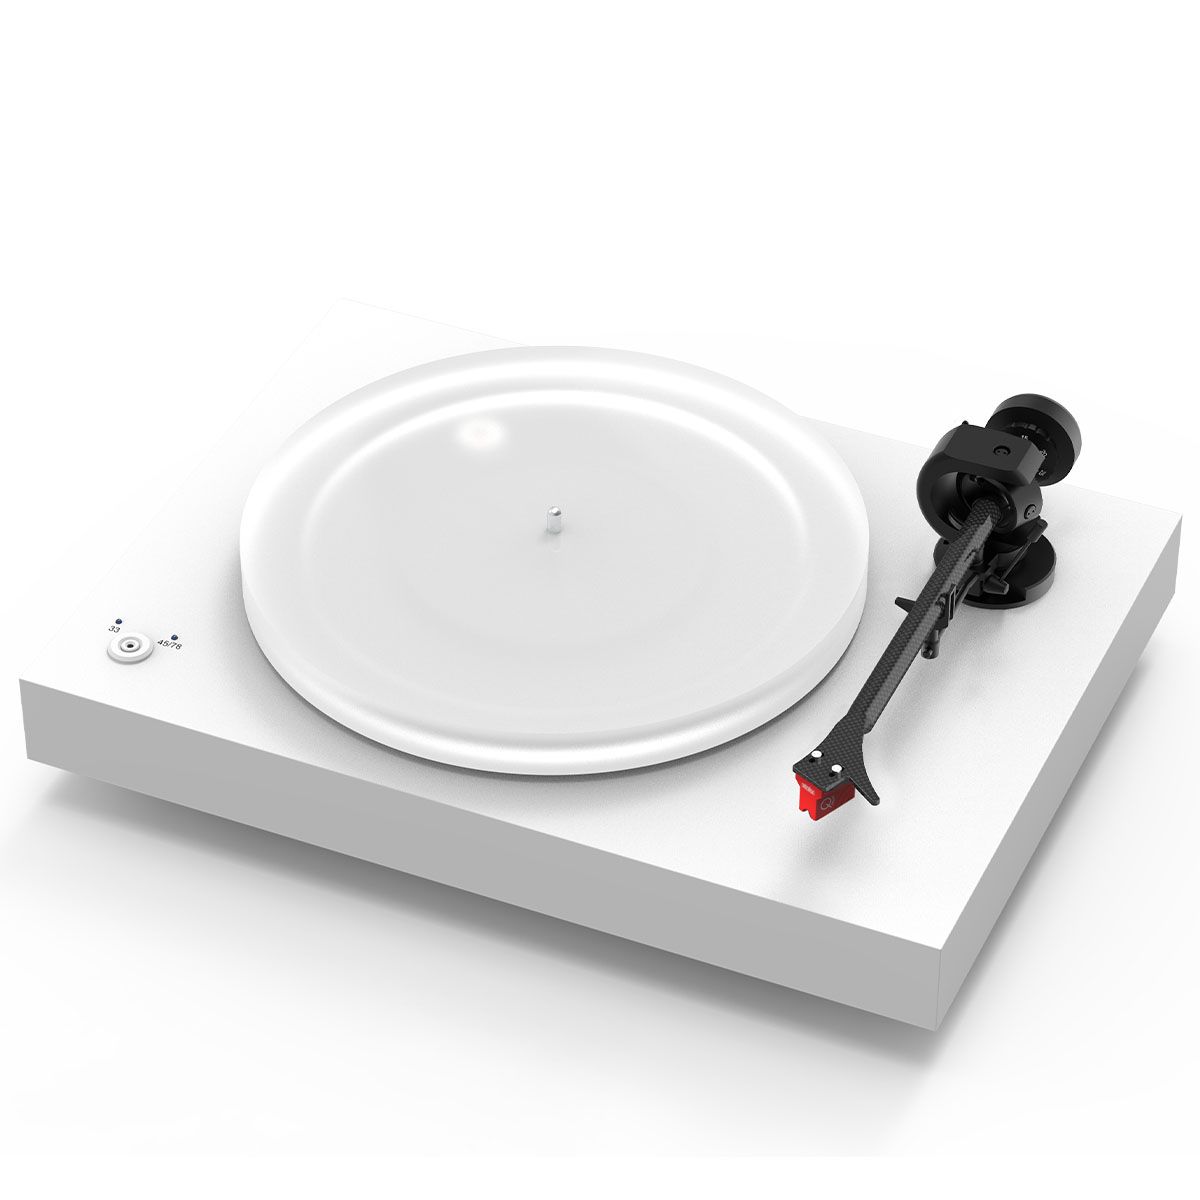 Pro-Ject X2B True Balanced Turntable - angled front view of satin white